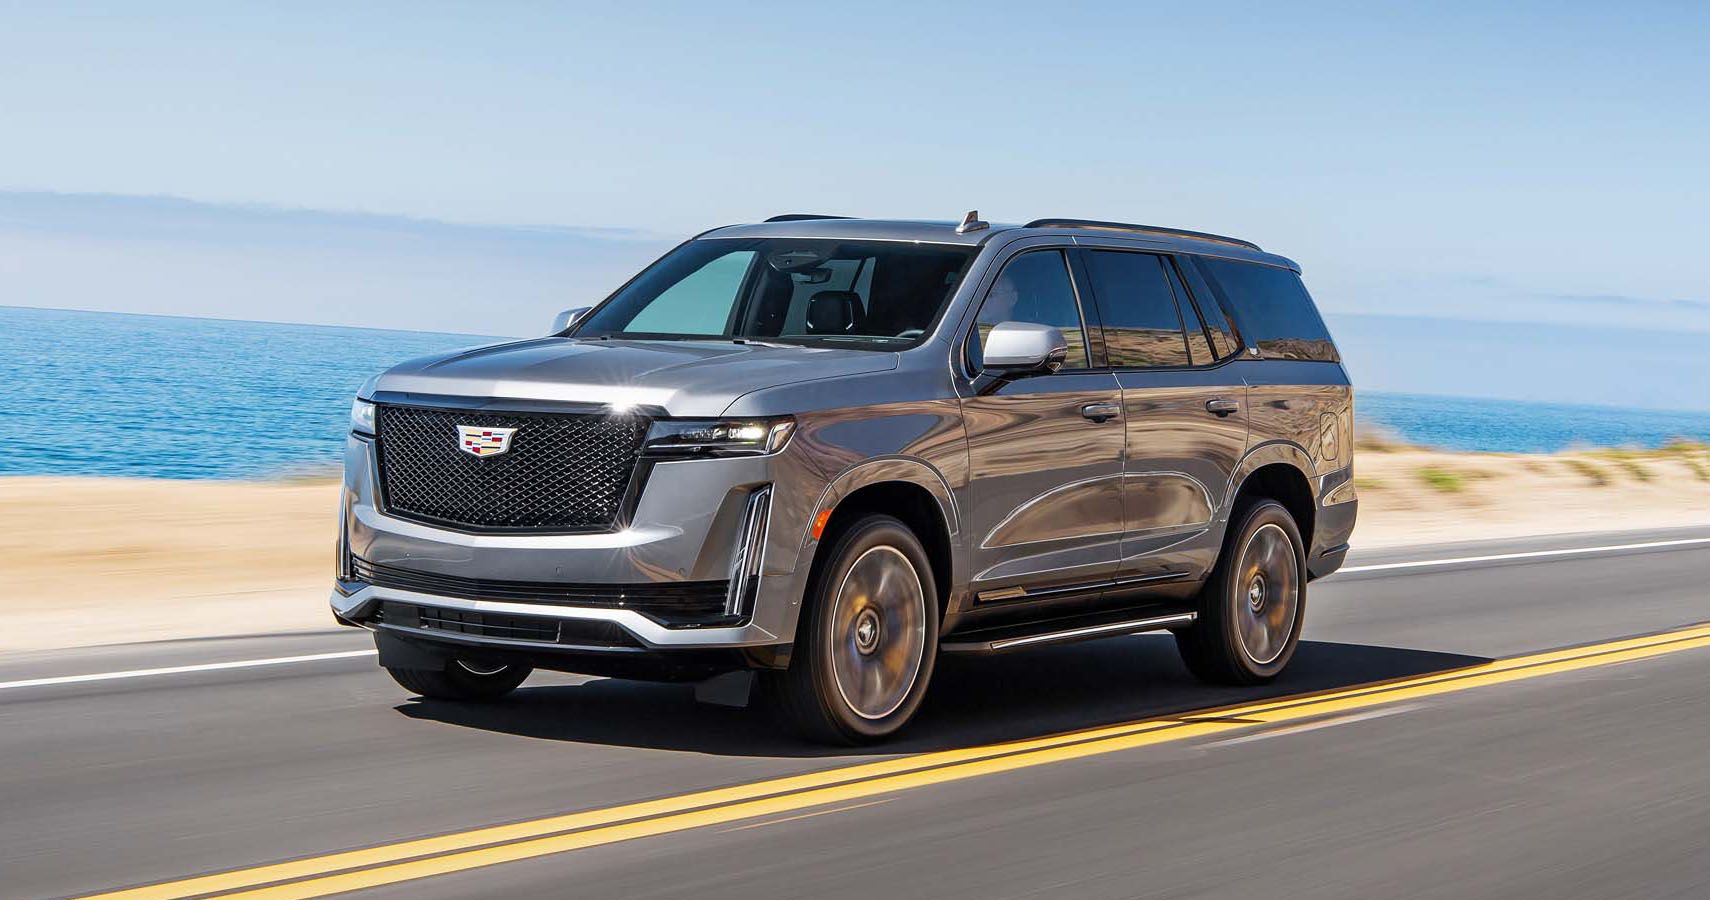 2021 Cadillac Escalade Missed A Big Opportunity (And How To Fix It)